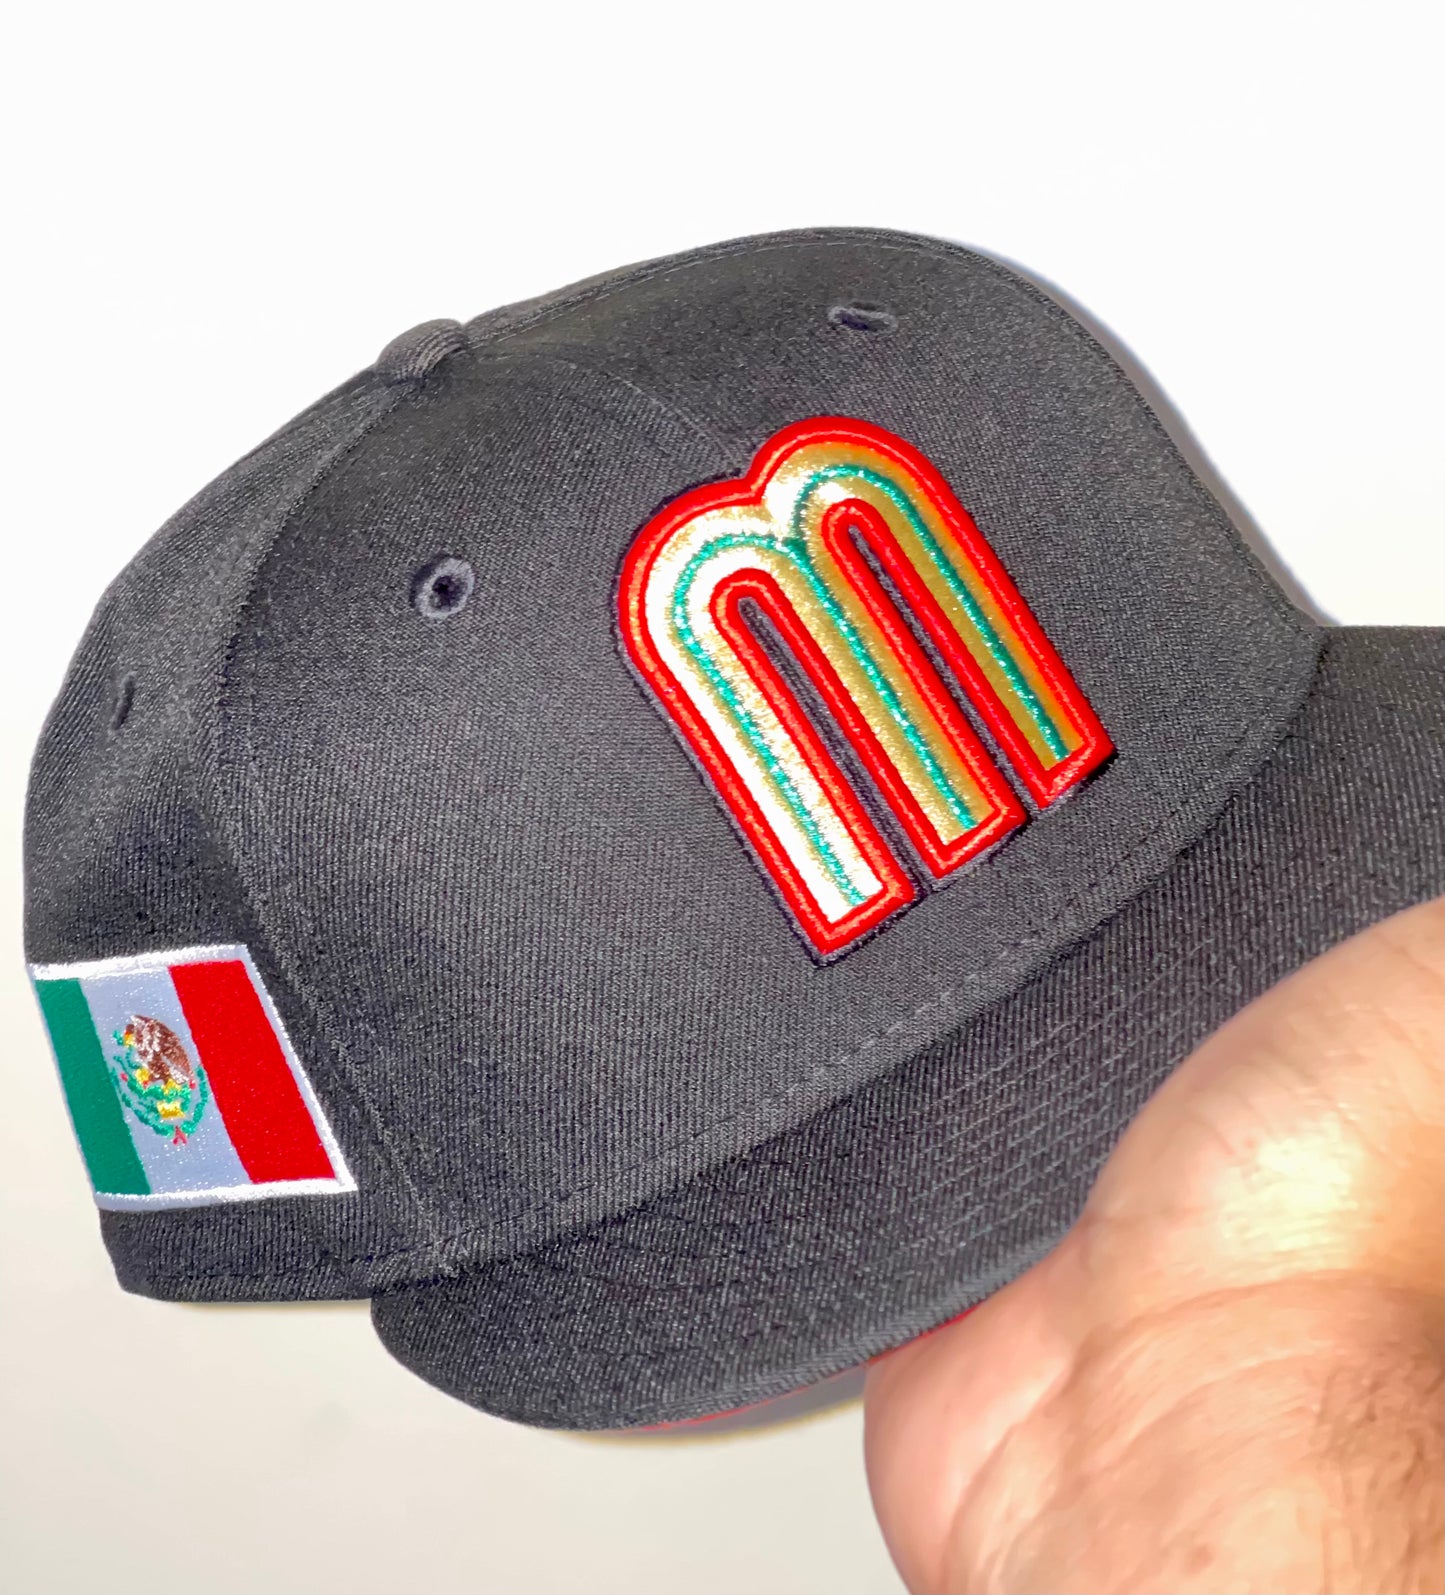 Mexico 2023 World Baseball Classic Fitted Hat (Black/Red uv)